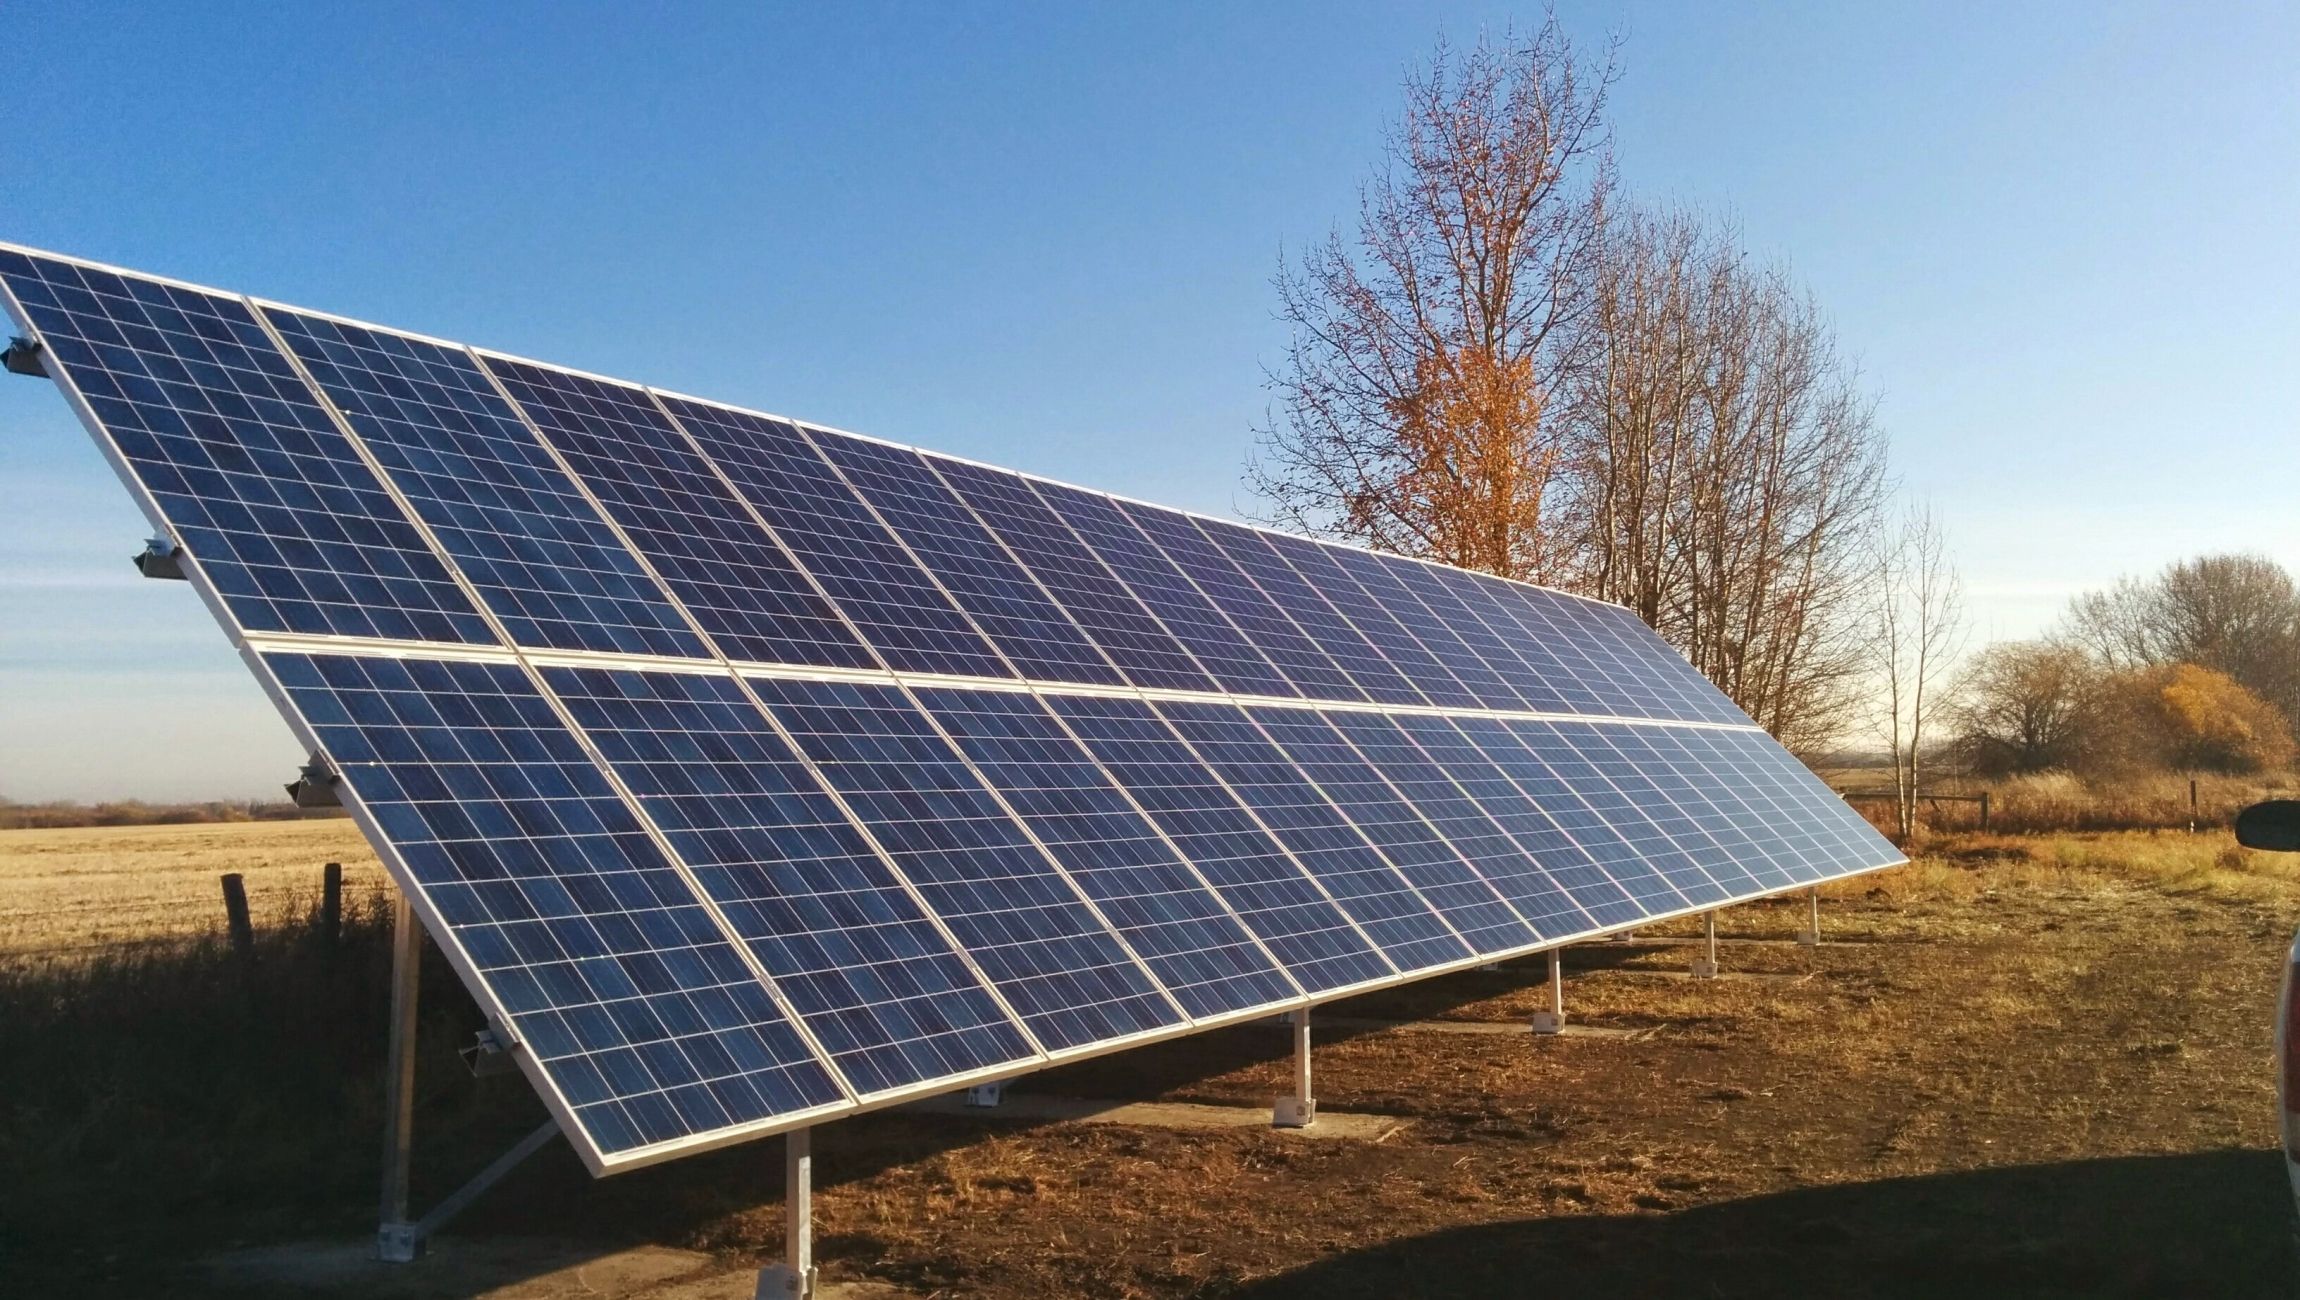 We are Installers of ground-mounted solar power systems.